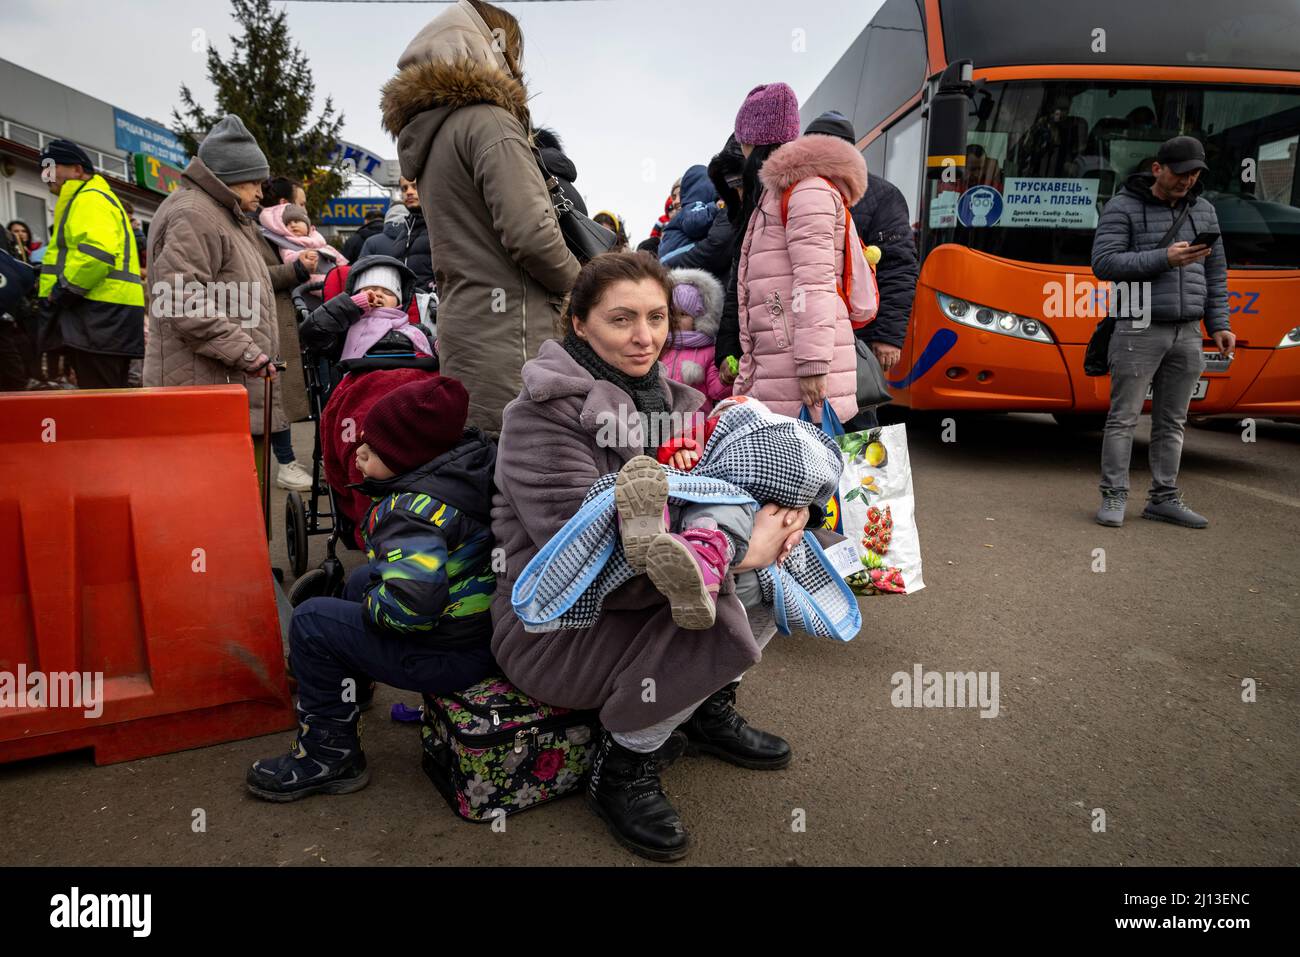 Arrival of refugees from Ukraine on the Ukrainian side of the border crossing in Shehyni. Here the refugees wait, in long queues, for clearance by Ukrainian border officials. After entering Poland, they are provided with hot food and clothing, and then transferred by bus to large sites or collective shelters. Stock Photo